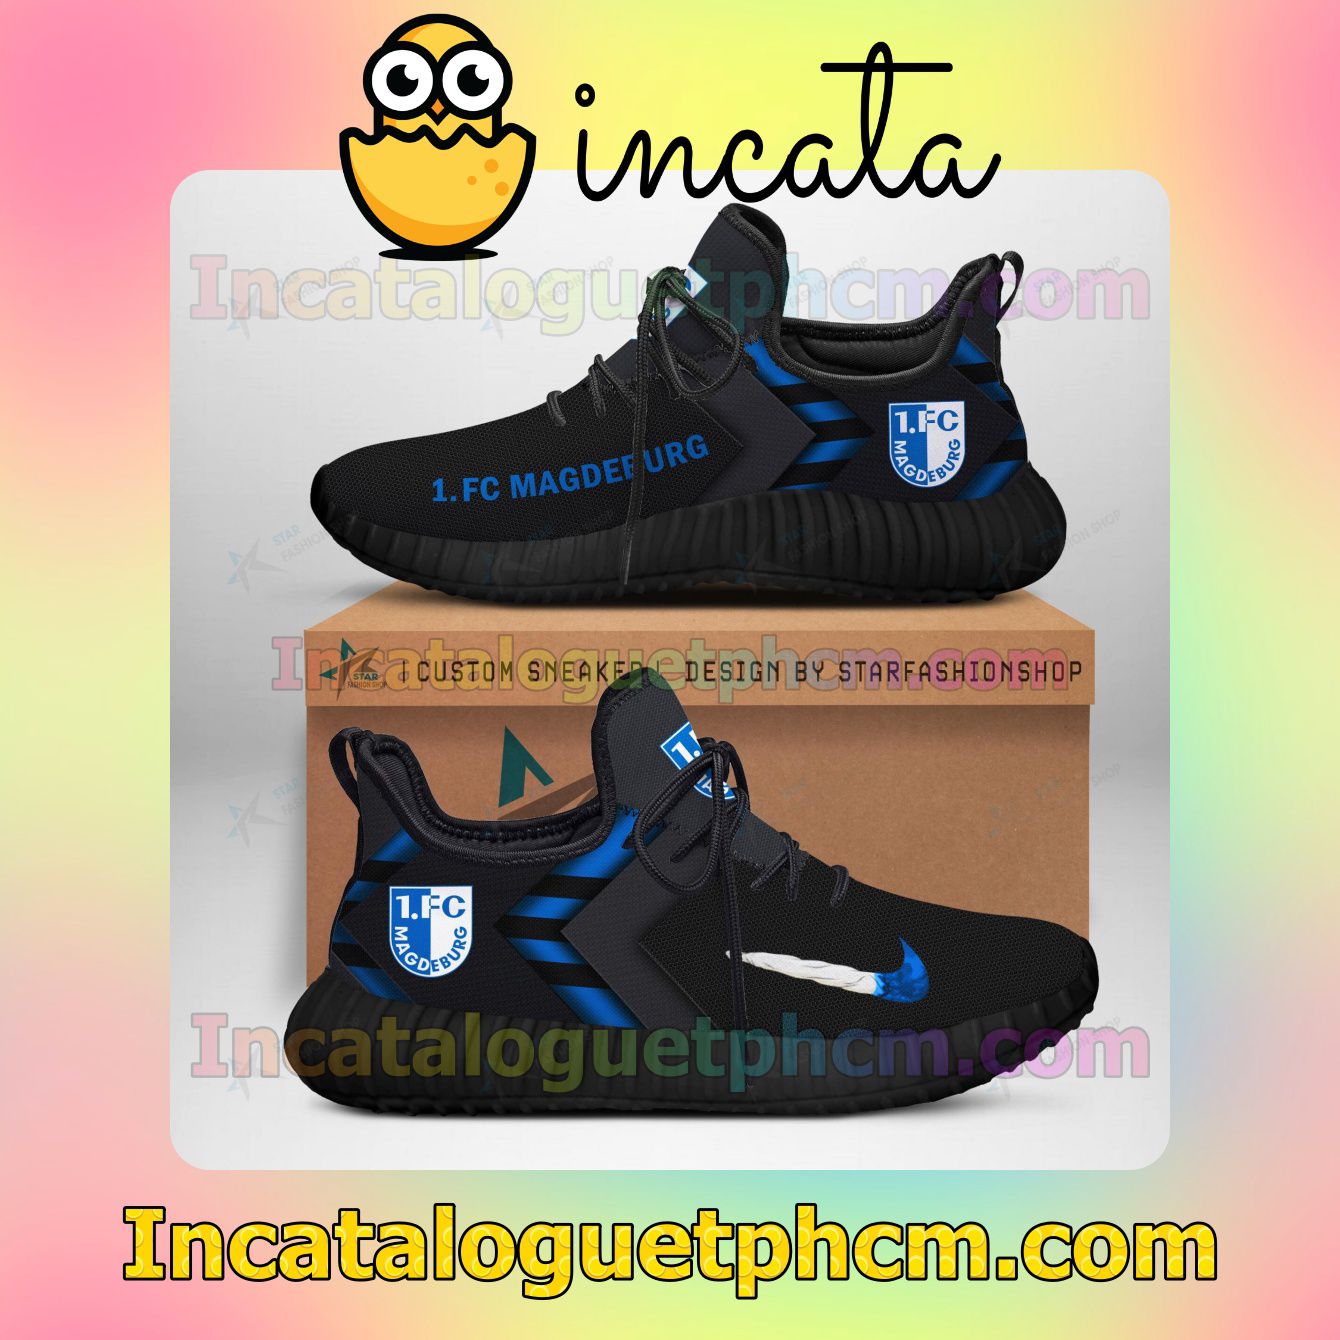 Unisex 1. FC Magdeburg Ultraboost Yeezy Shoes Sneakers